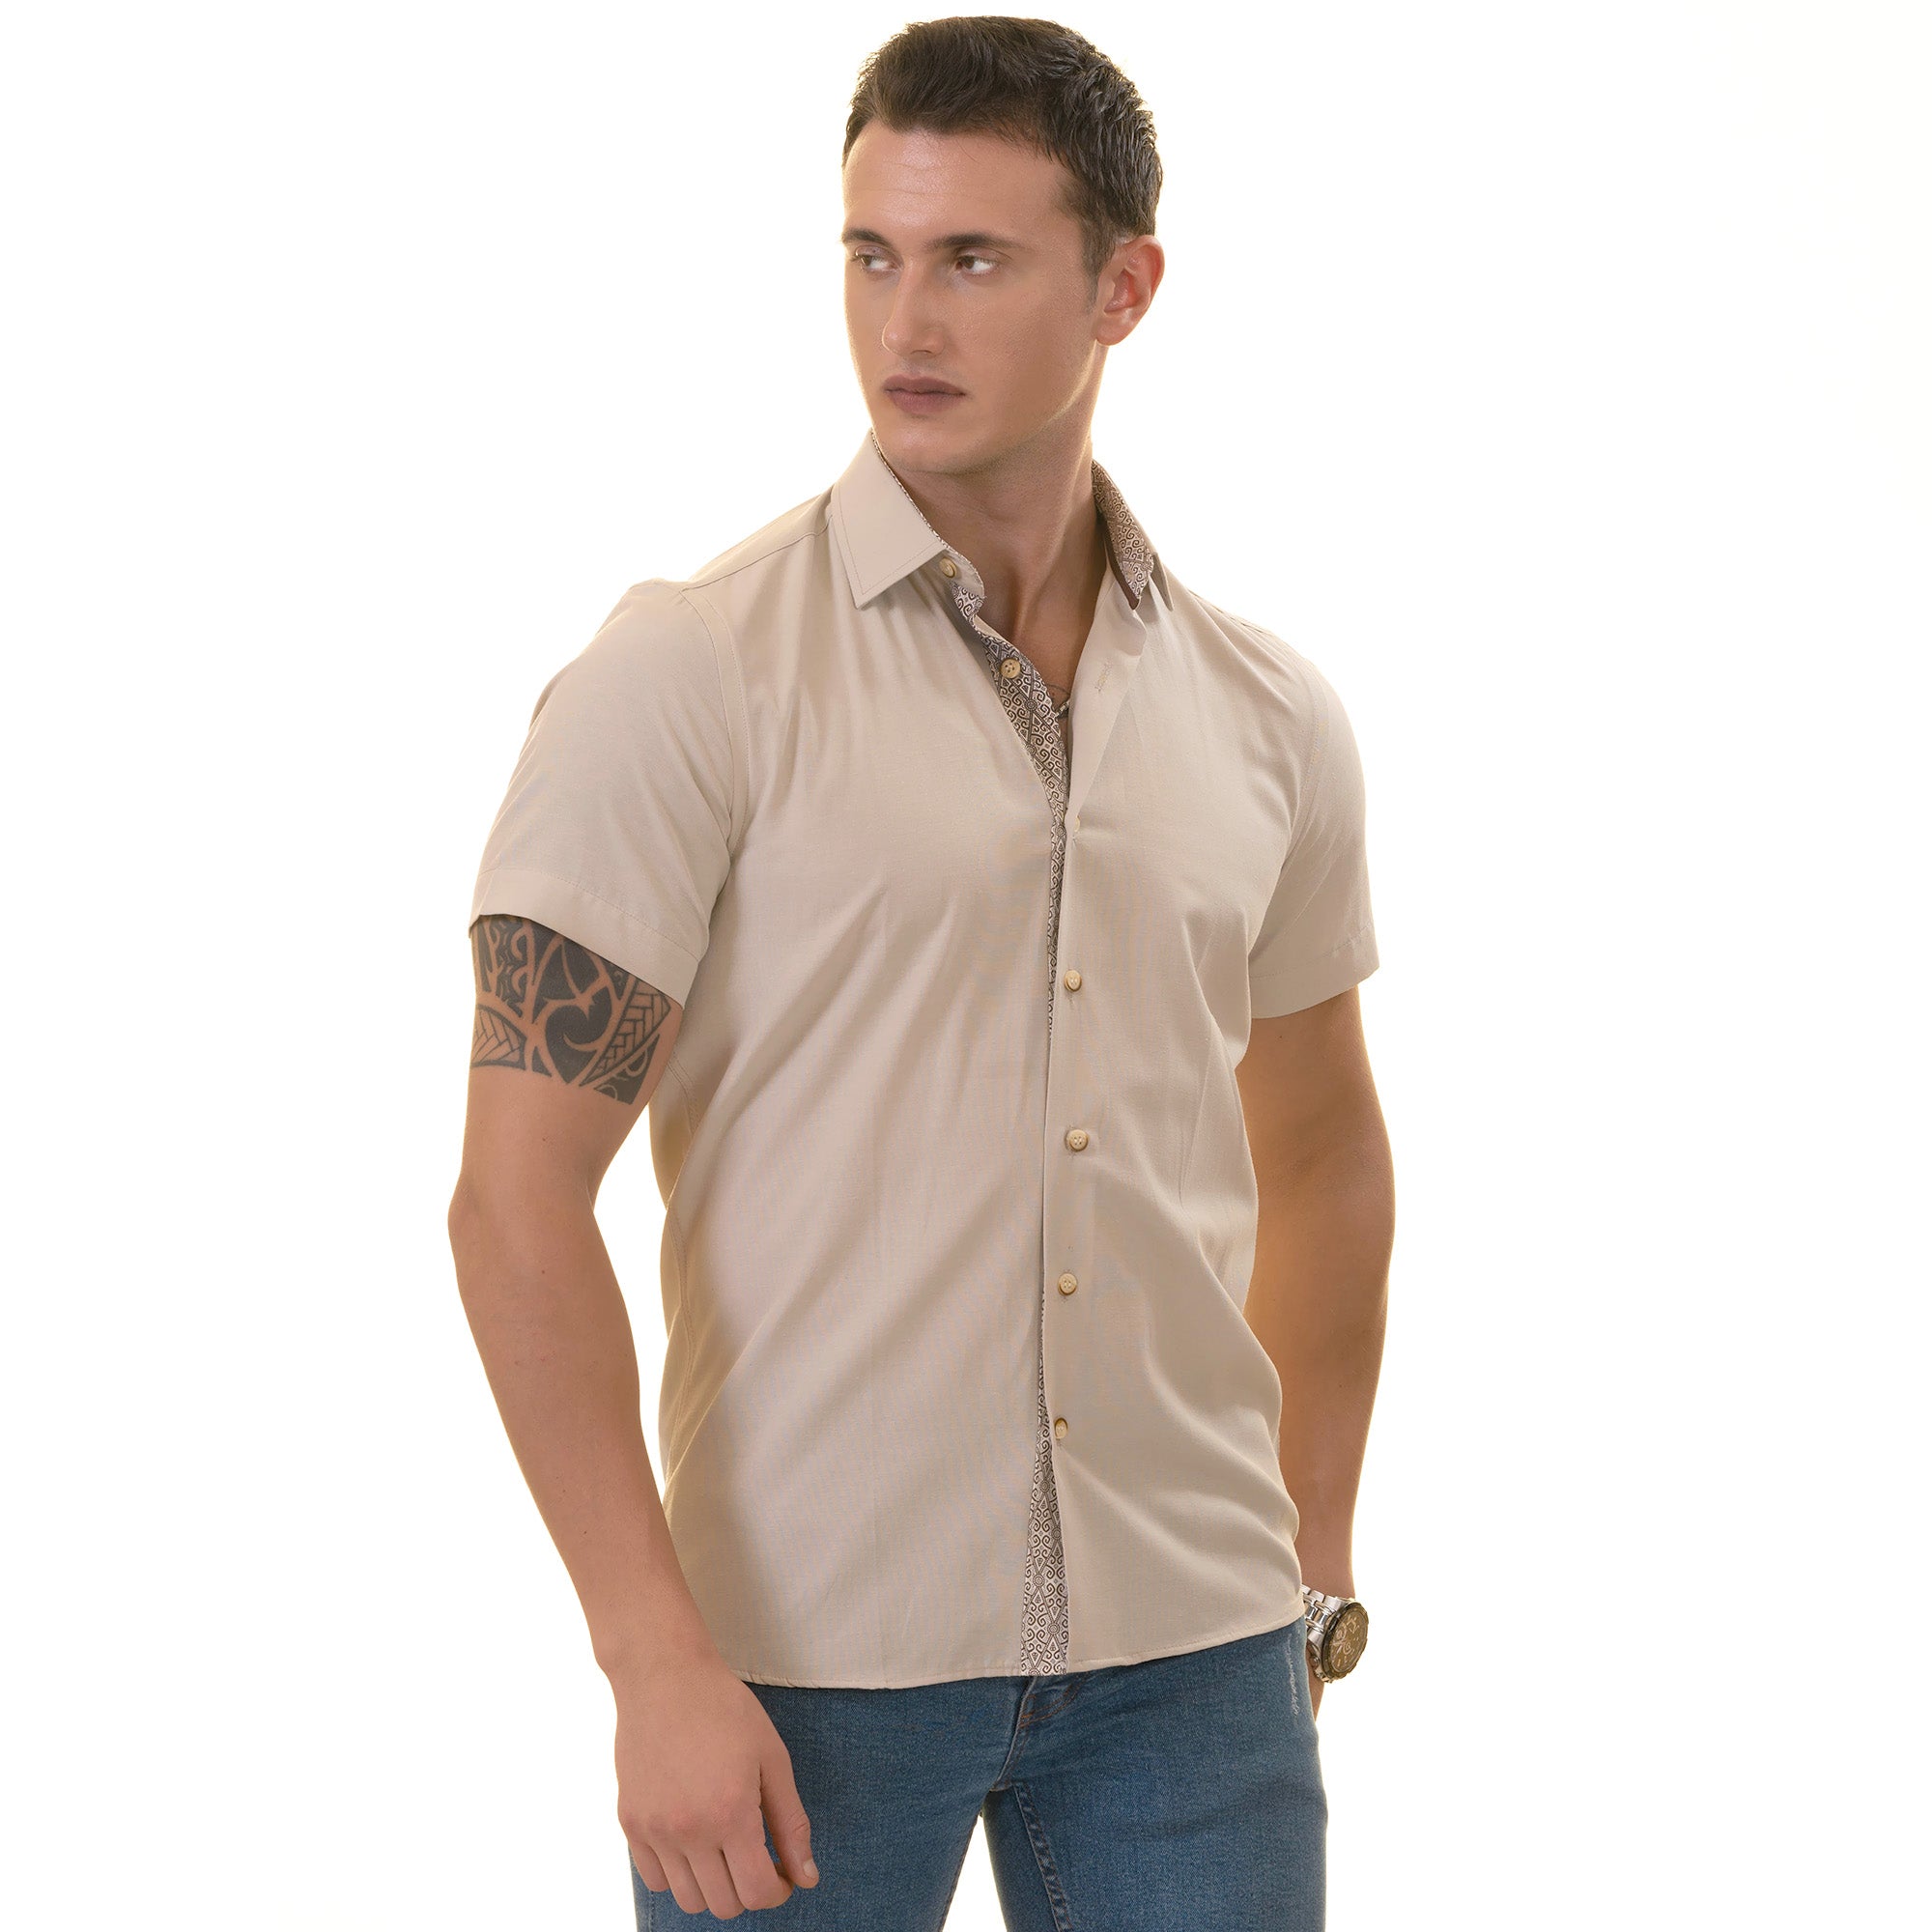 Beige inside different Paisley  Short Sleeve Button up Shirts - Tailored Slim Fit Cotton Dress Shirts